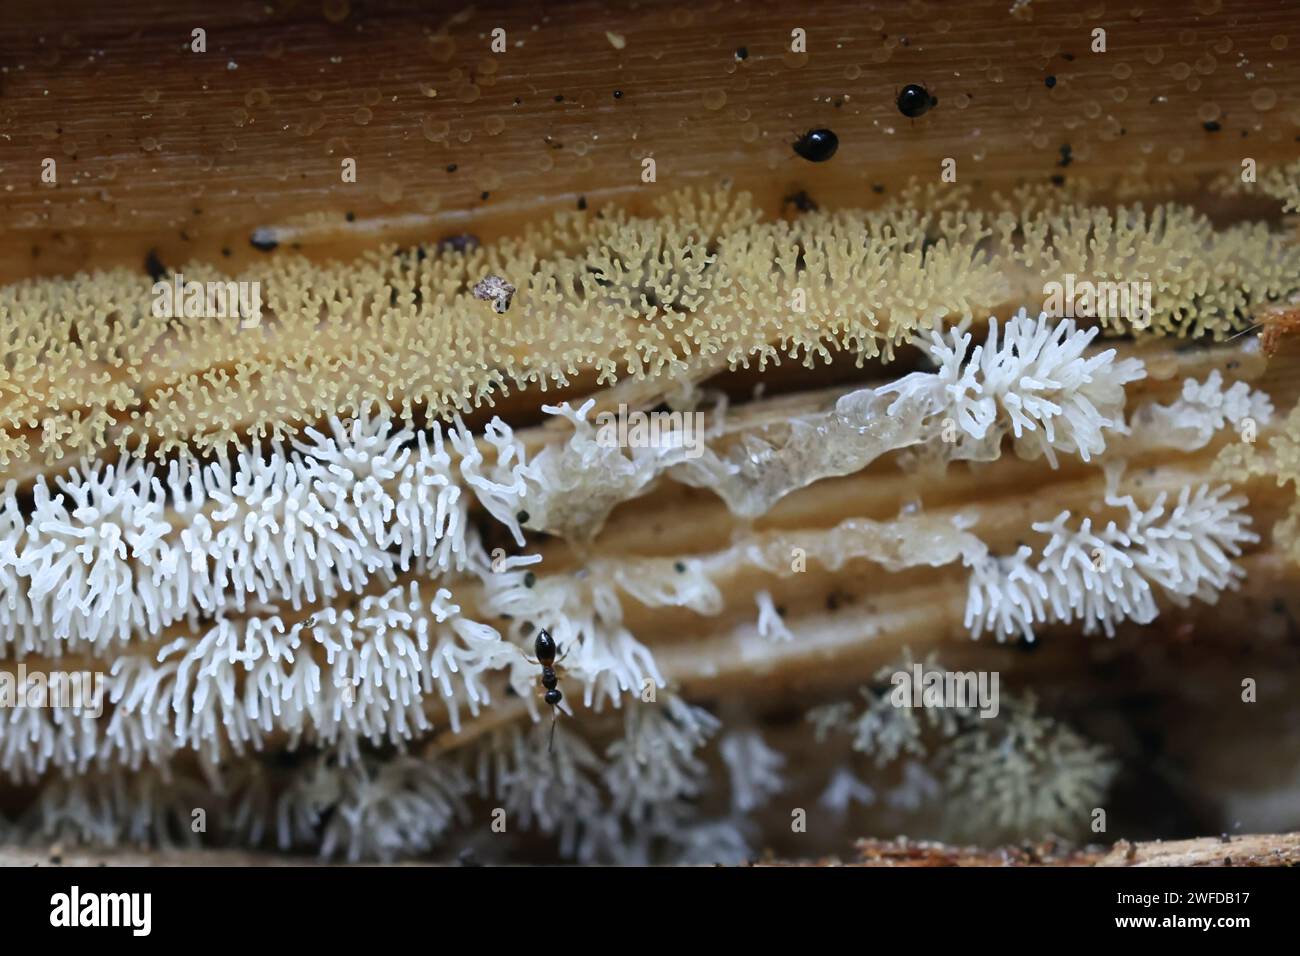 Ceratiomyxa fruticulosa, commonly known as white coral, slime mold from Finland Stock Photo